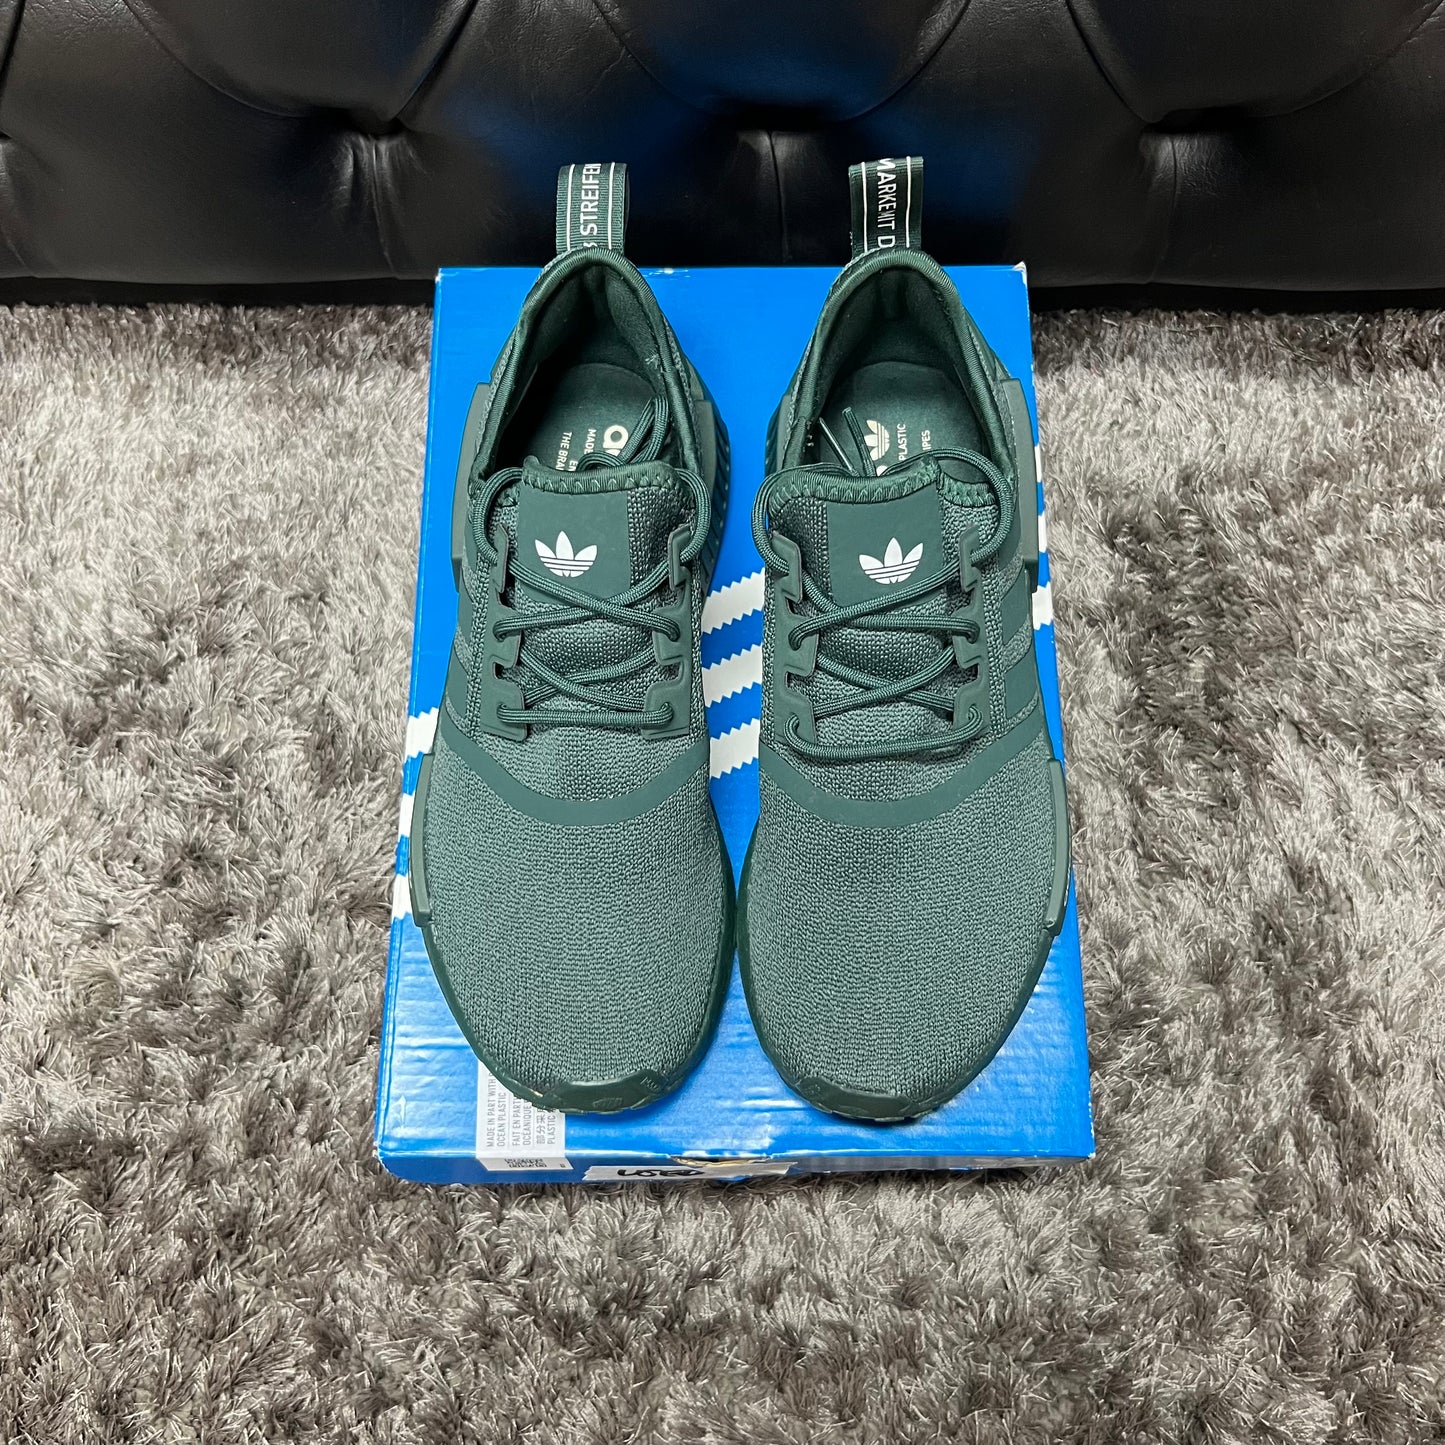 Adidas NMD R1 Mineral Green size 7.5 used